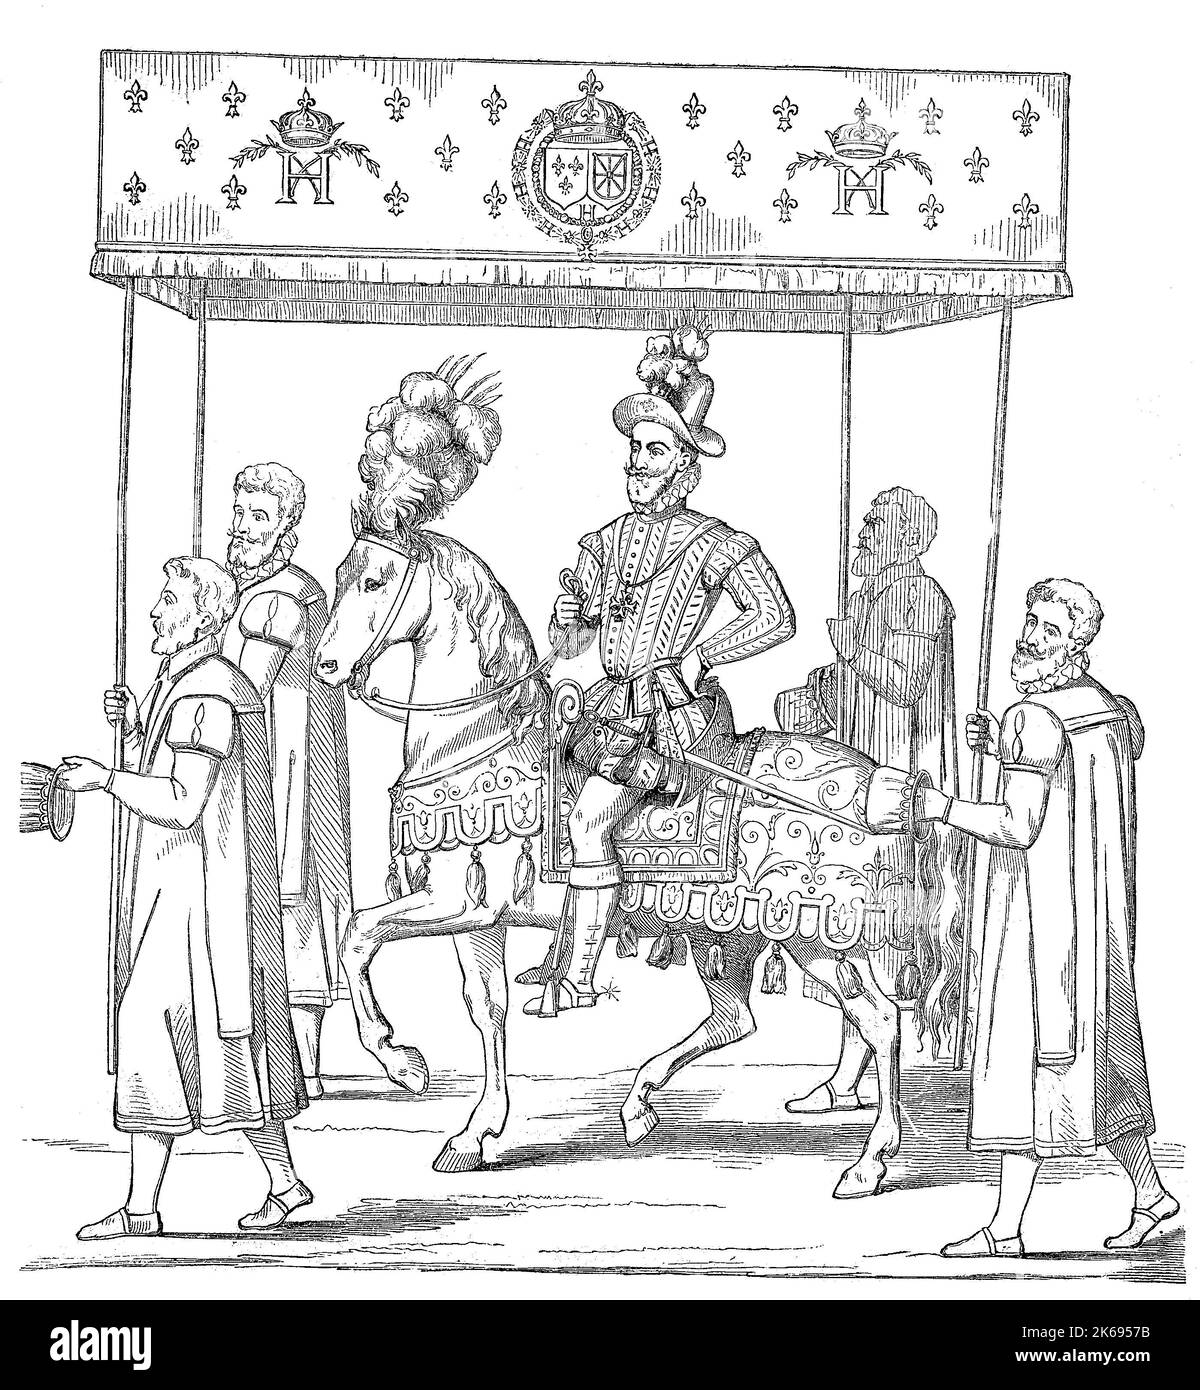 Digital improved reproduction, Henry IV., of navarra, henri IV, henri quatre, henri le grand, born 1553, died in 1610 in paris, to horses and with canopy carriers on his arrival in rouen, original woodprint from th 19th century Stock Photo